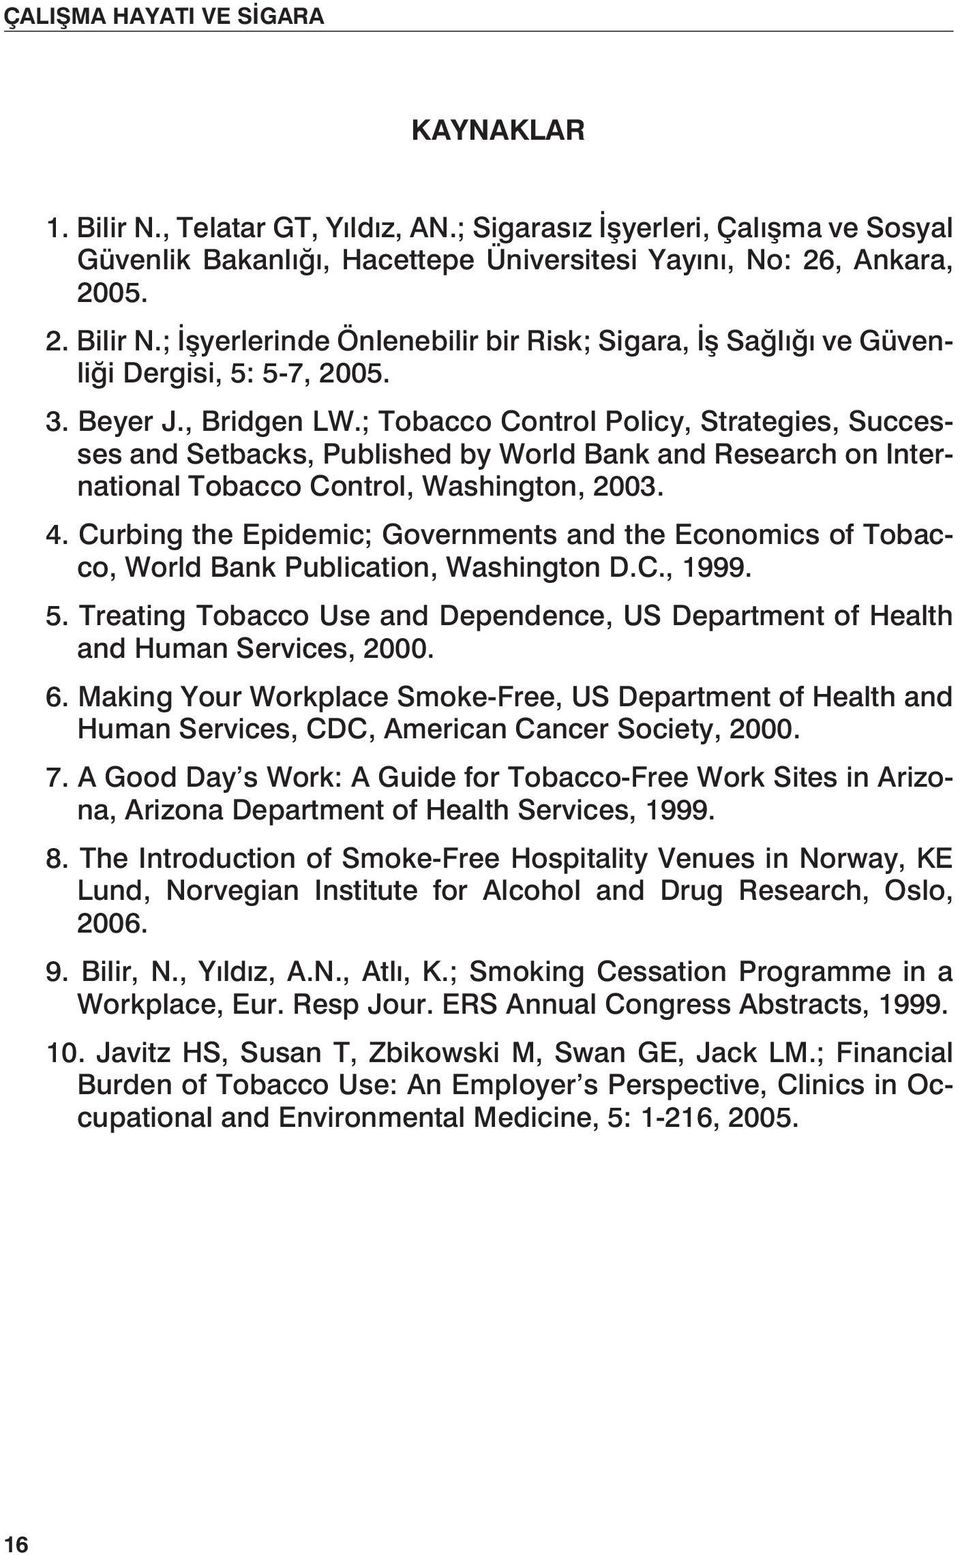 Curbing the Epidemic; Governments and the Economics of Tobacco, World Bank Publication, Washington D.C., 1999. 5. Treating Tobacco Use and Dependence, US Department of Health and Human Services, 2000.